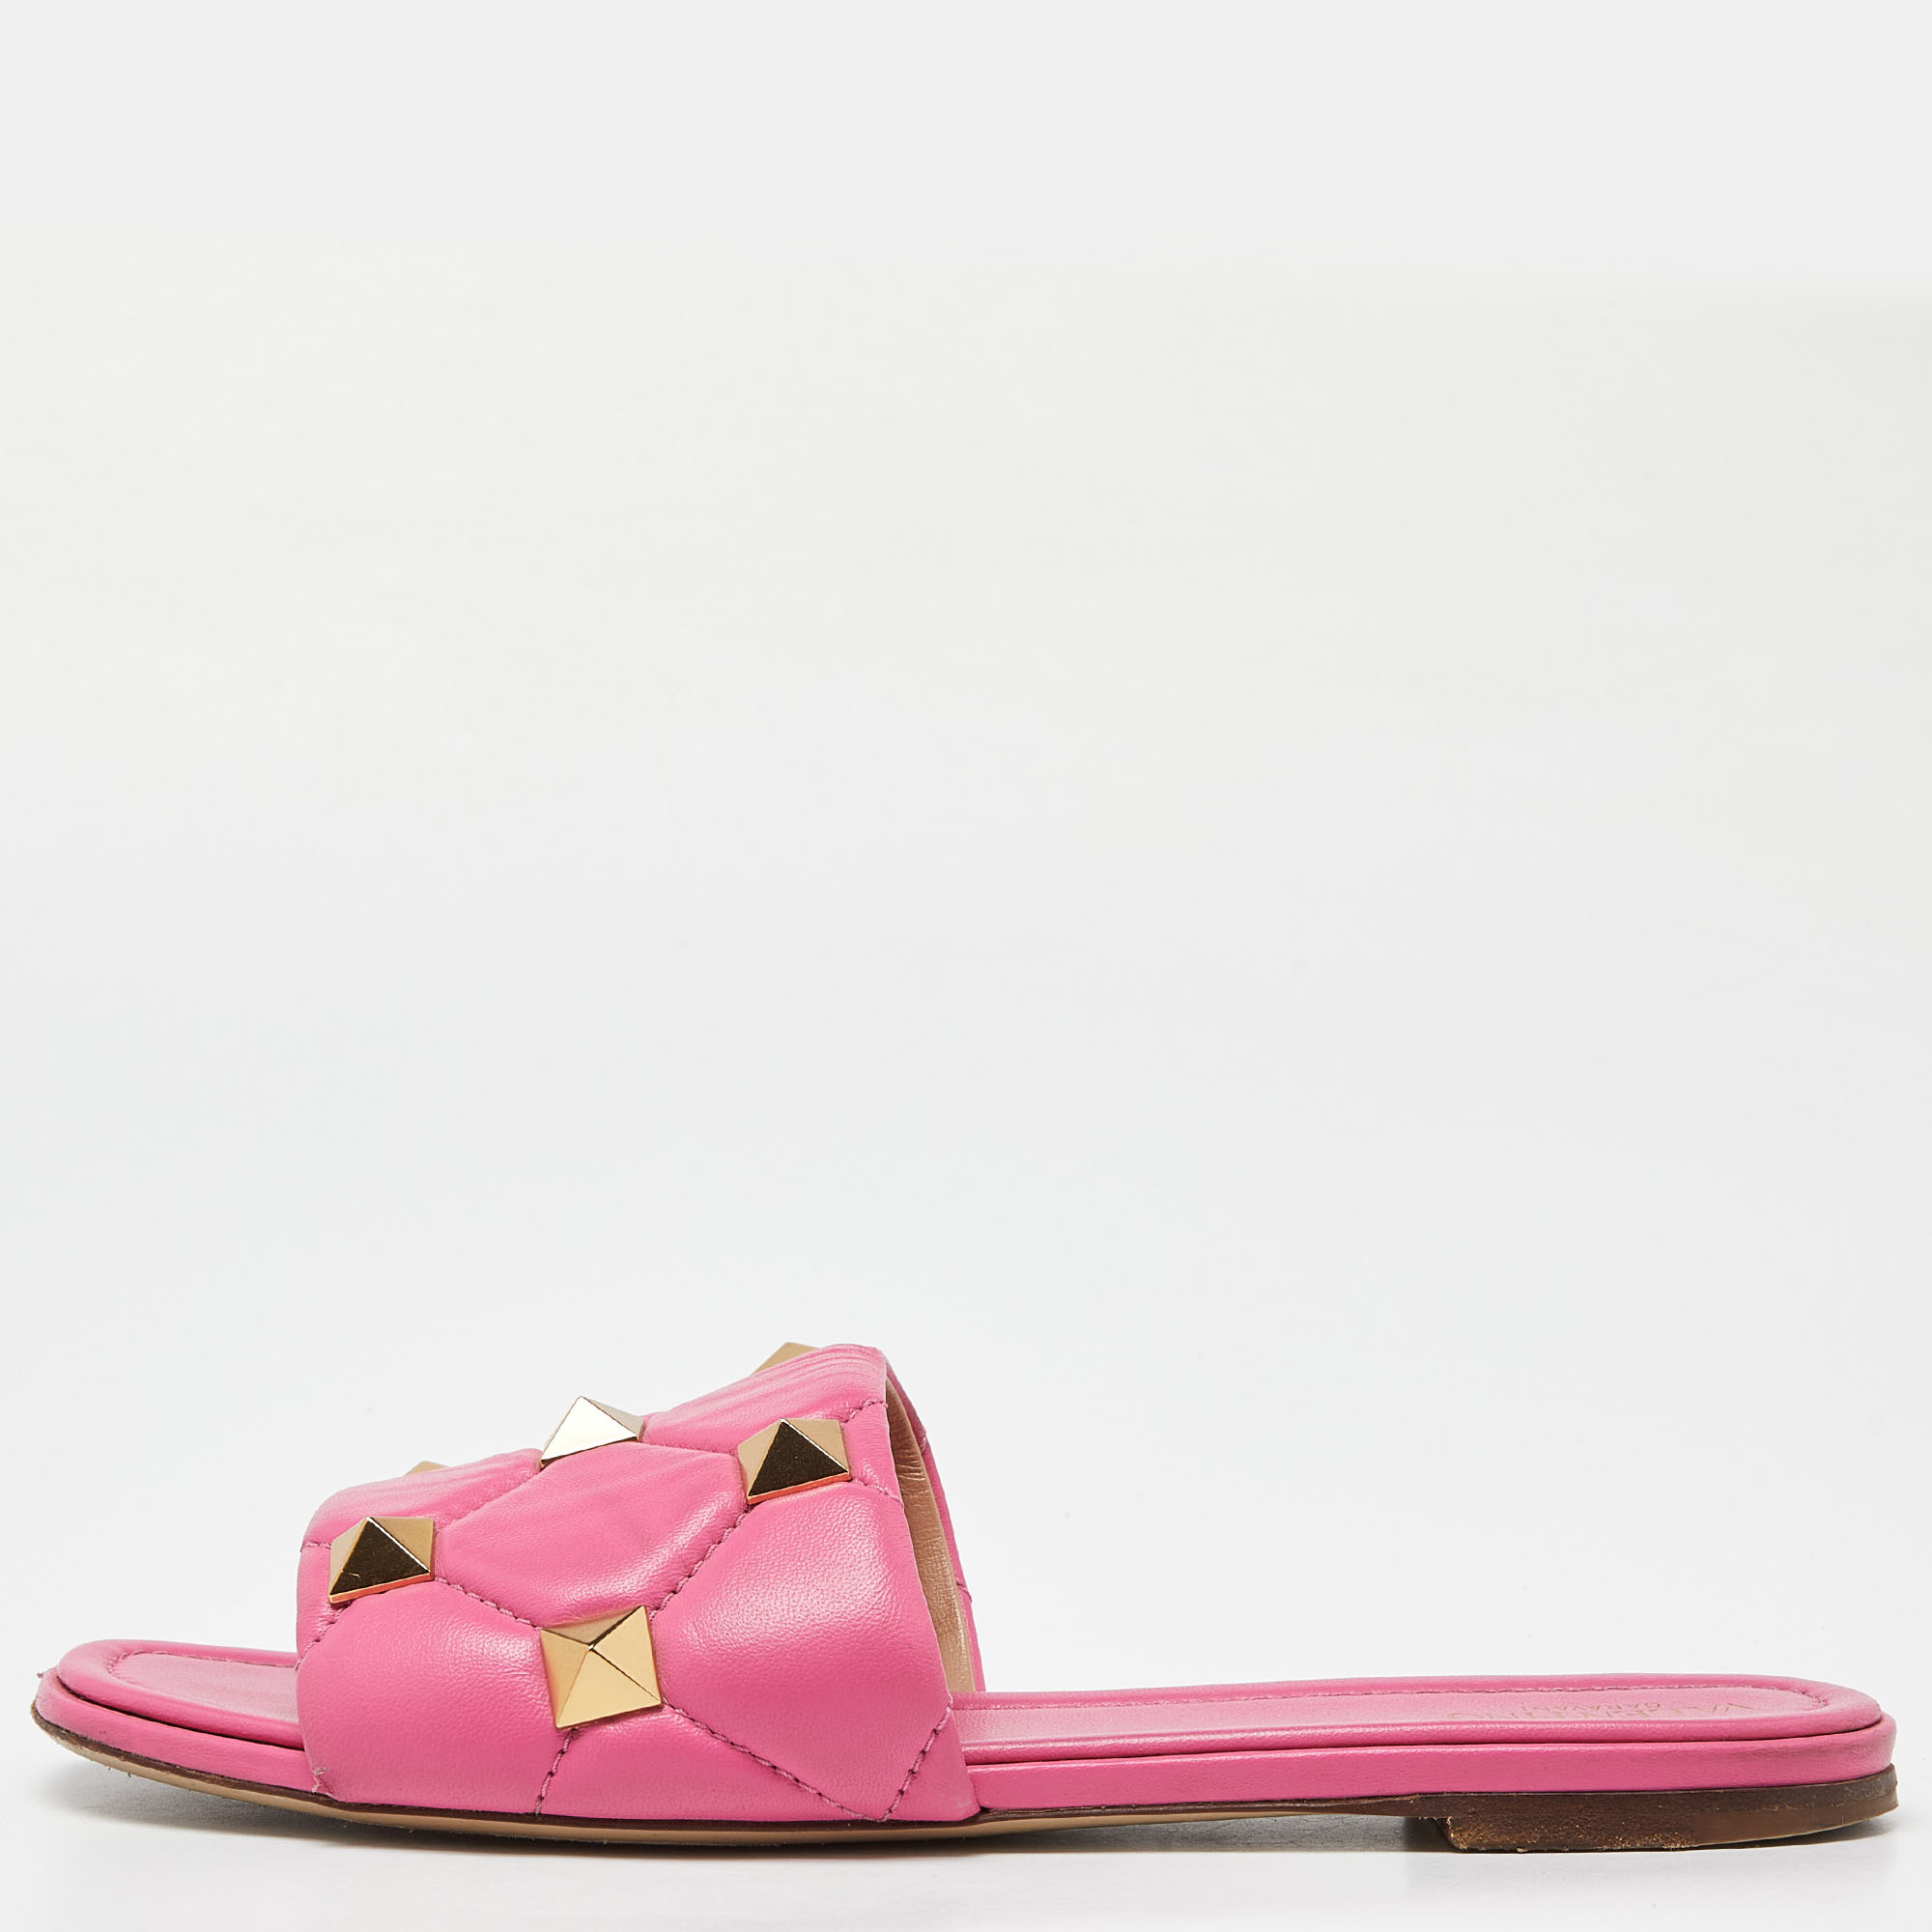 Pre-owned Valentino Garavani Pink Quilted Leather Roman Stud Flat Slides Size 41